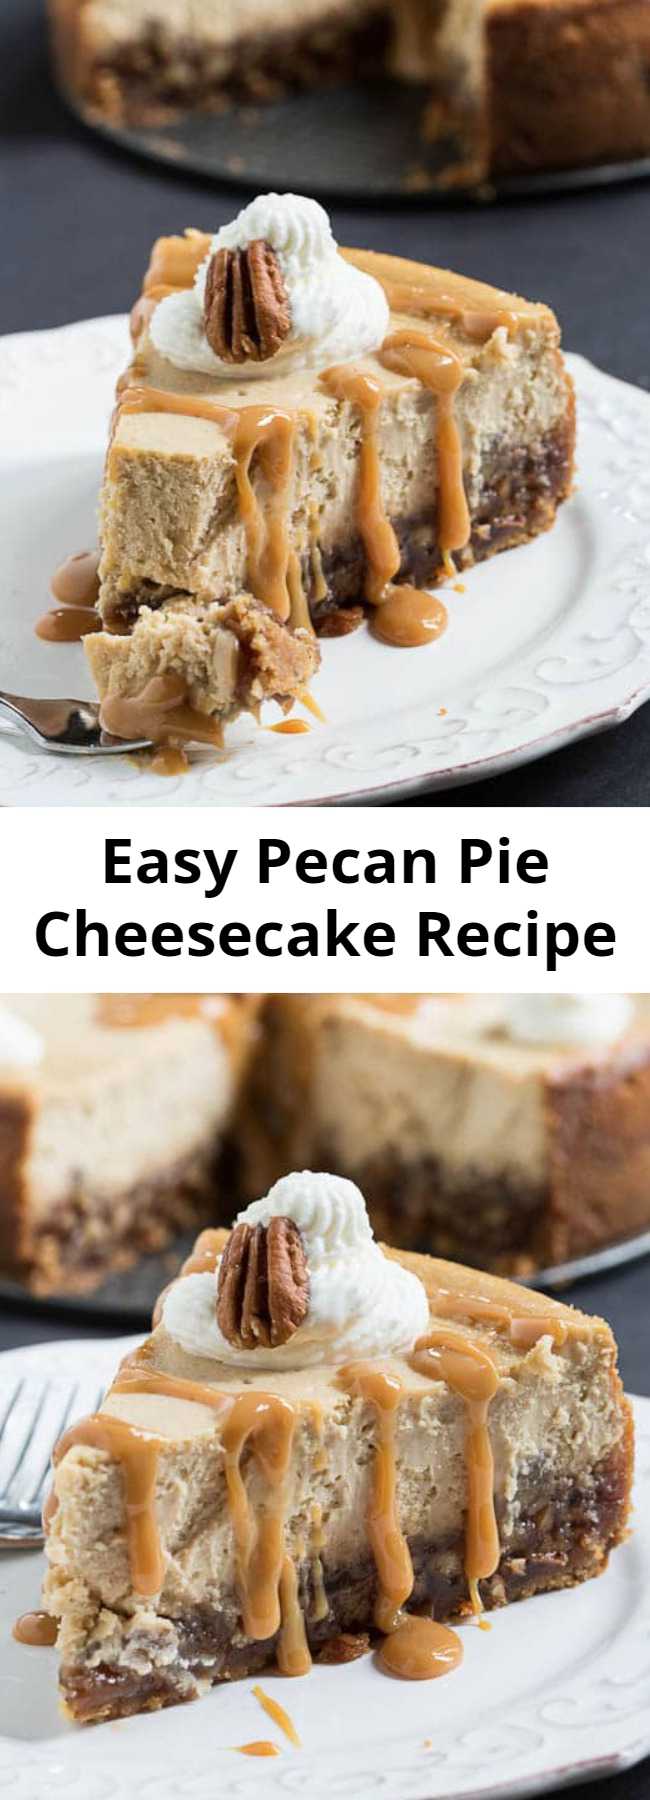 Easy Pecan Pie Cheesecake Recipe - Cheesecake and Pecan Pie together in one dessert. A truly decadent dessert with a layer of pecan pie in a vanilla wafer crust, topped by a creamy cheesecake. How could anything be better?